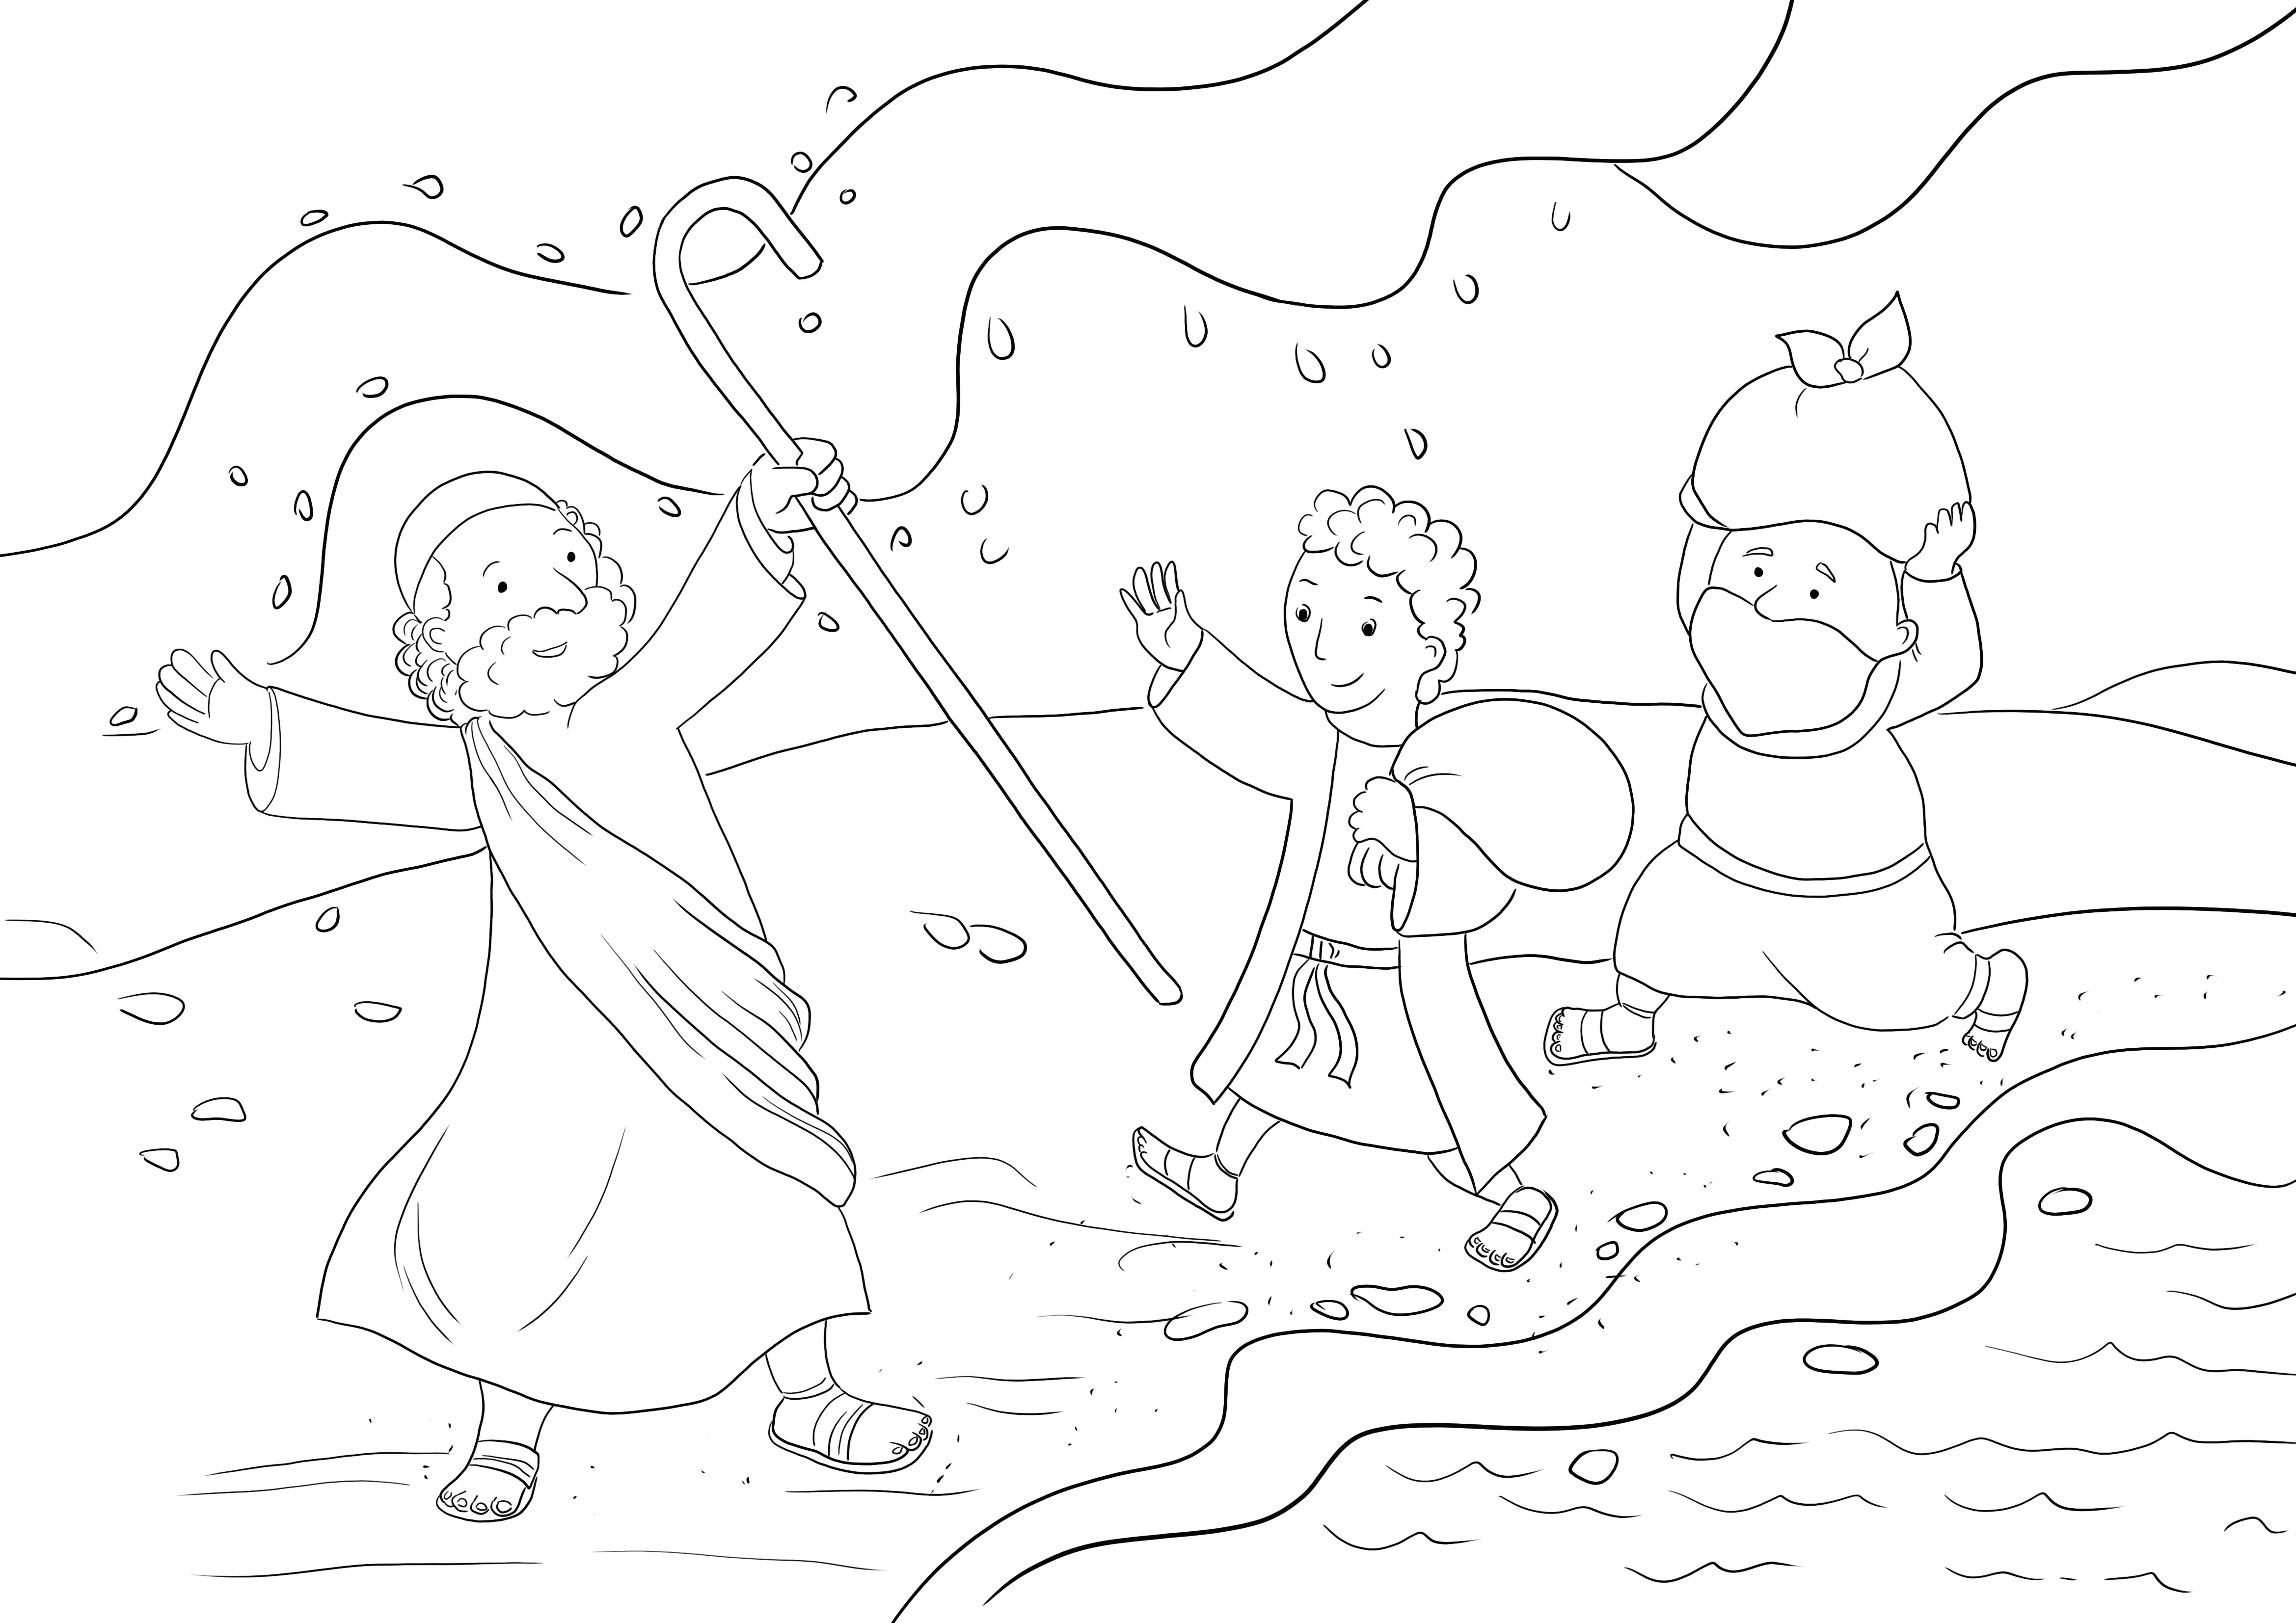 Here is a free printable of Israelites Cross the Red Sea sheet to color easily